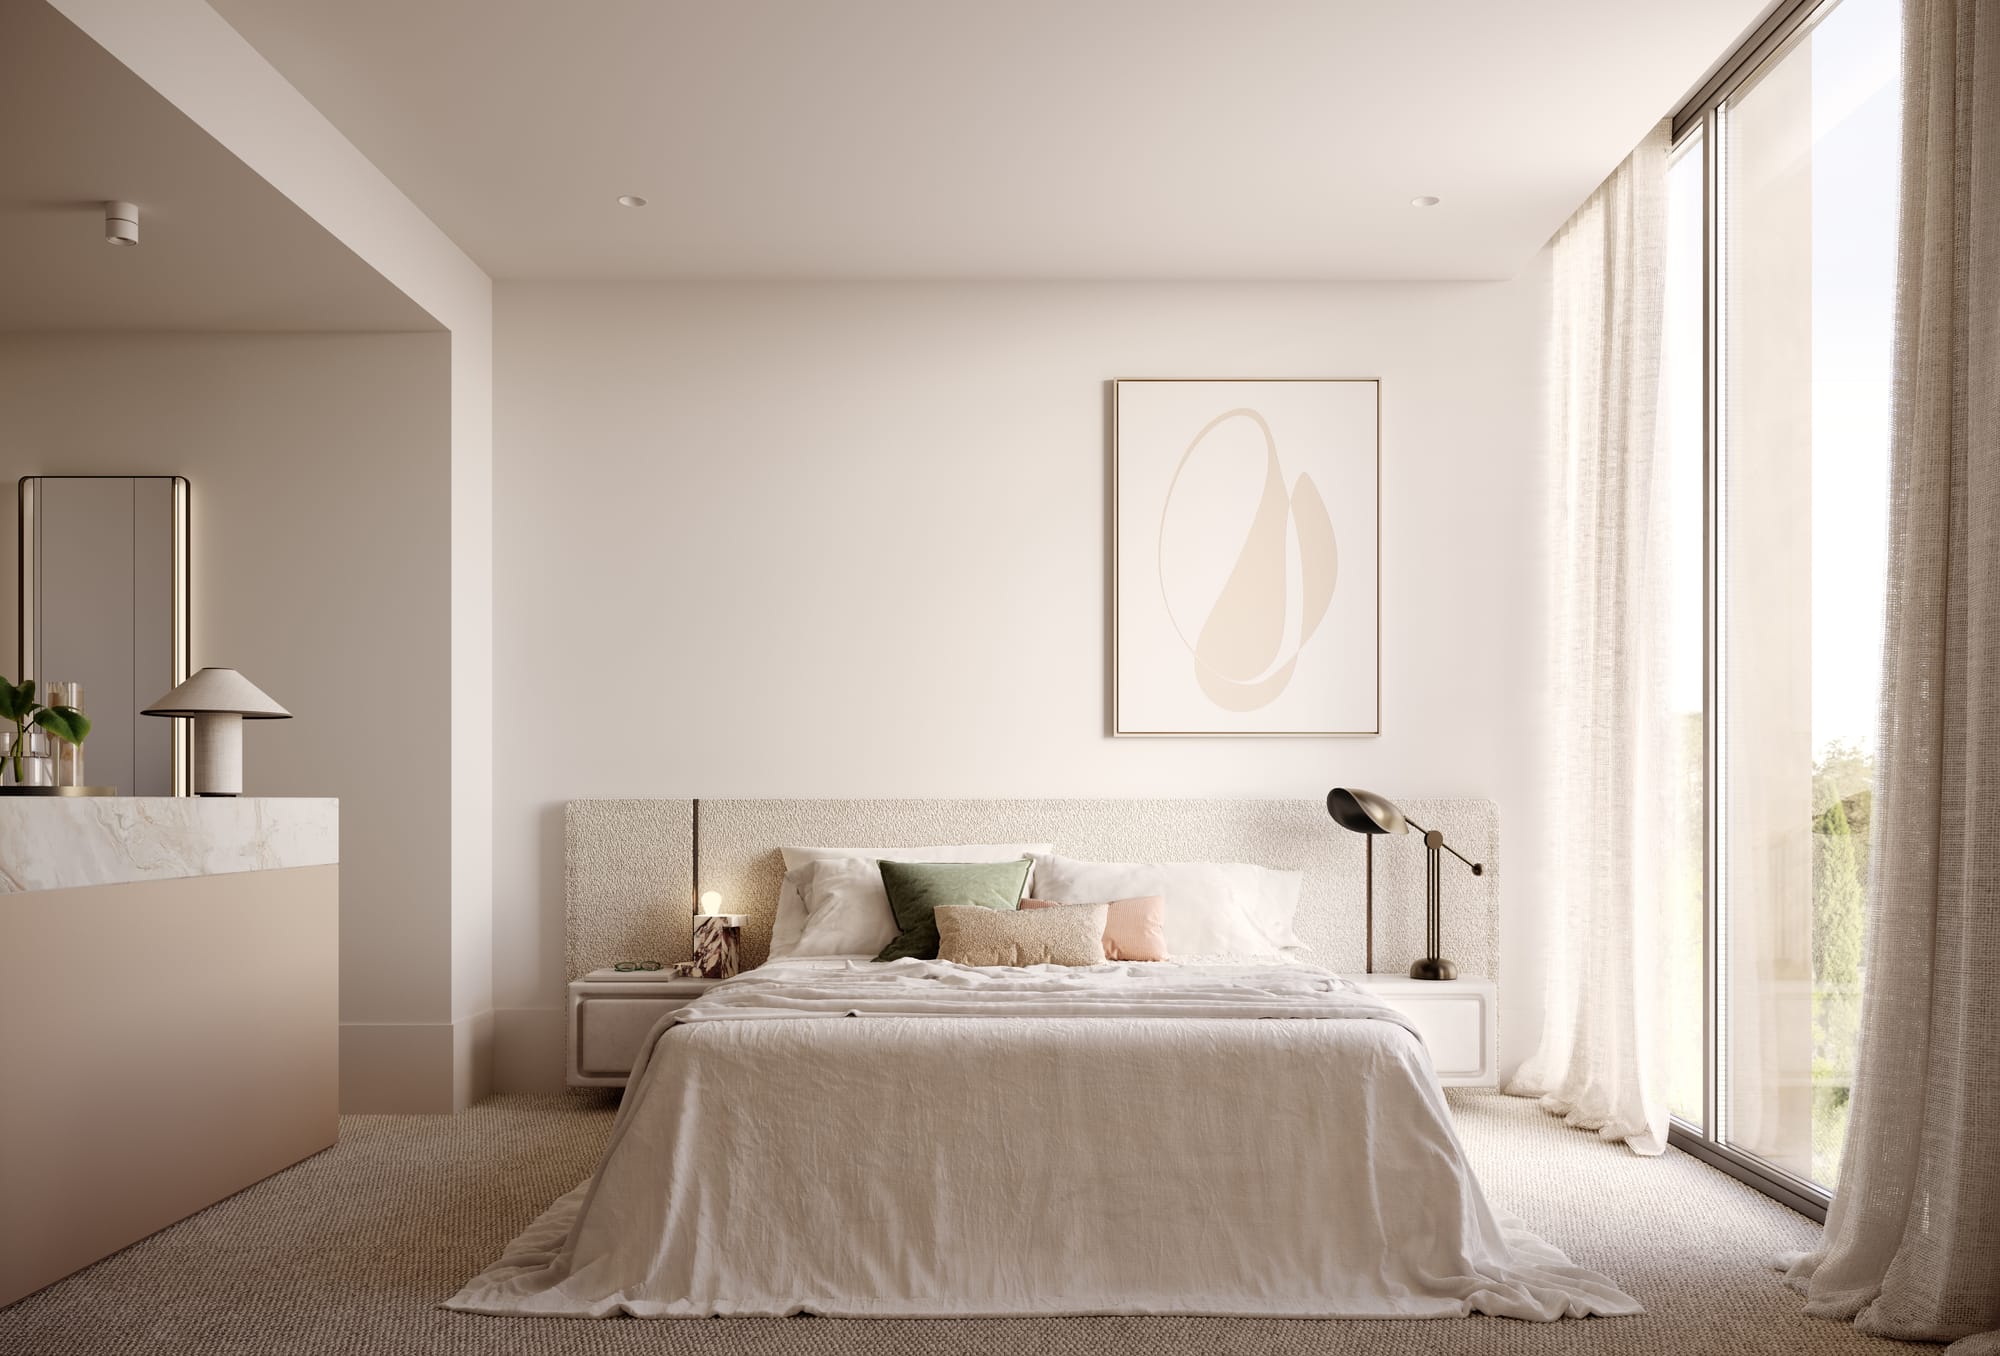 Sculpt Hawthorn by Mim Design, Parallel Workshop and Jack Merlo. Render by Studio Piper.  Bedroom with floor-to-ceiling windows, large bed and beige carpets. Built-in upholstered bedhead. Partition wall topped with marble to the left. 